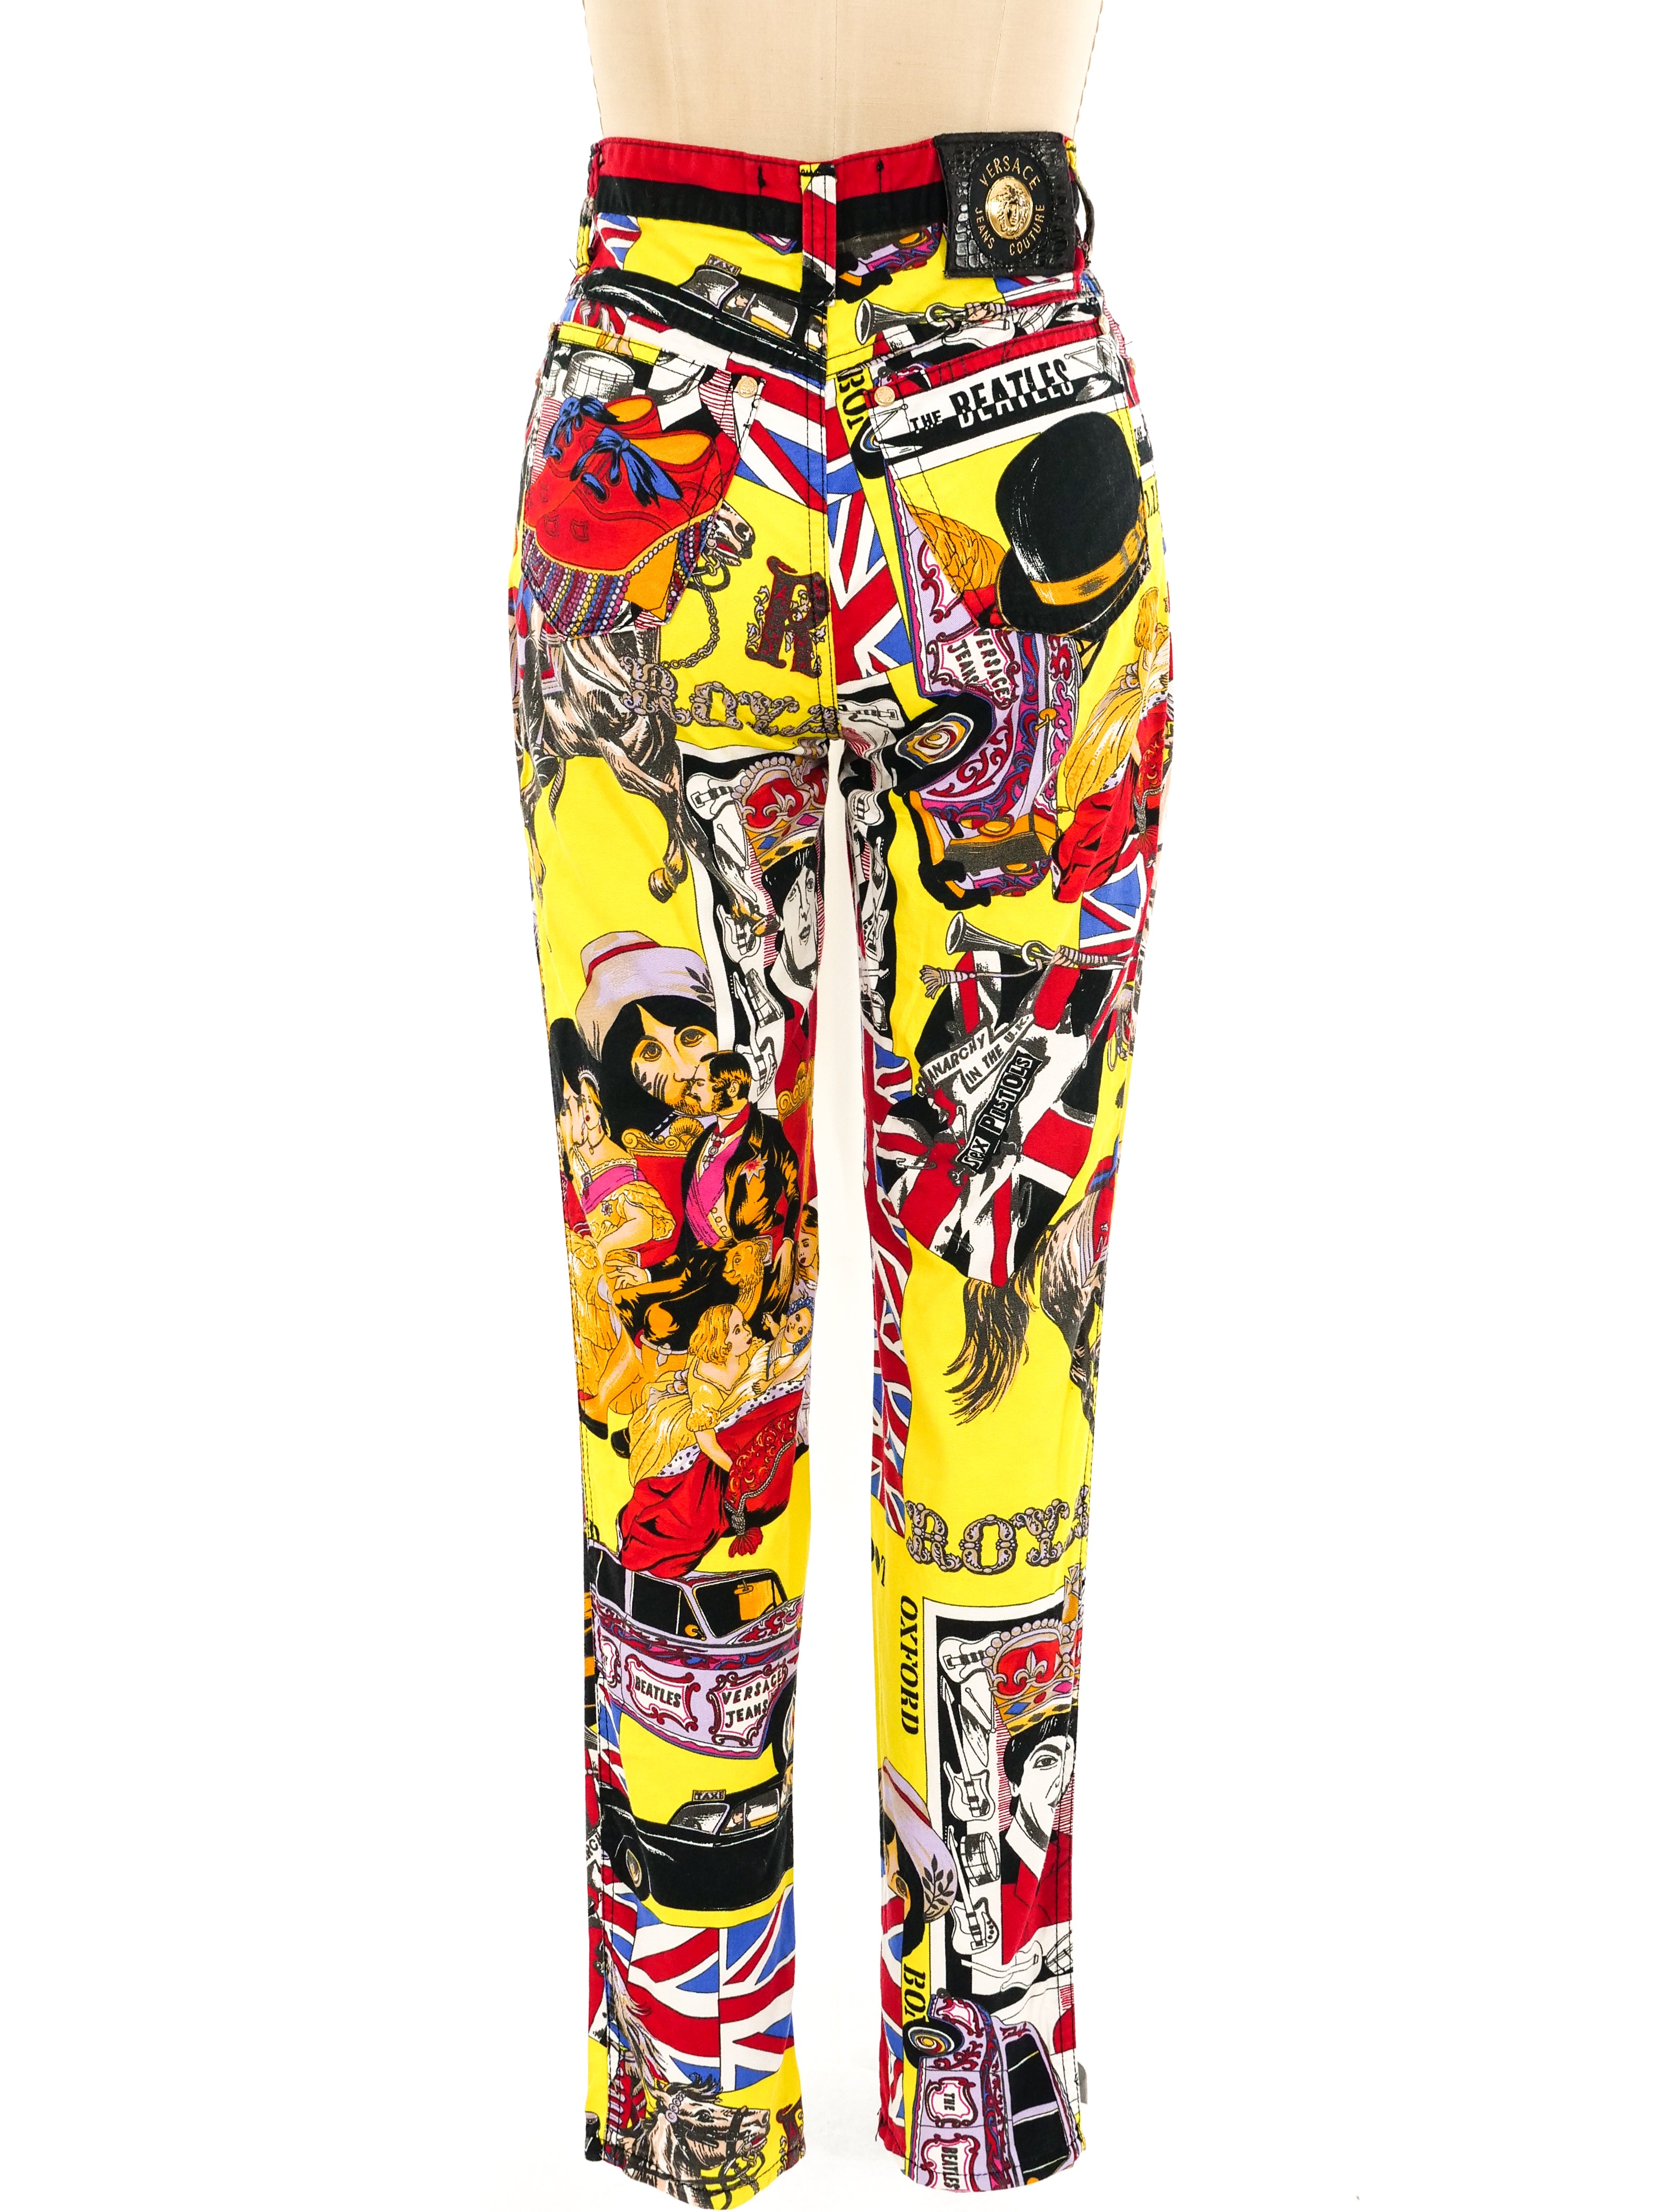 Buy Versace Jeans Trousers, Horses Print, Vintage Versace Jeans Couture  Cotton Trousers, Medium Size, Vintage Gianni Versace Denim Trousers Online  in India - Etsy